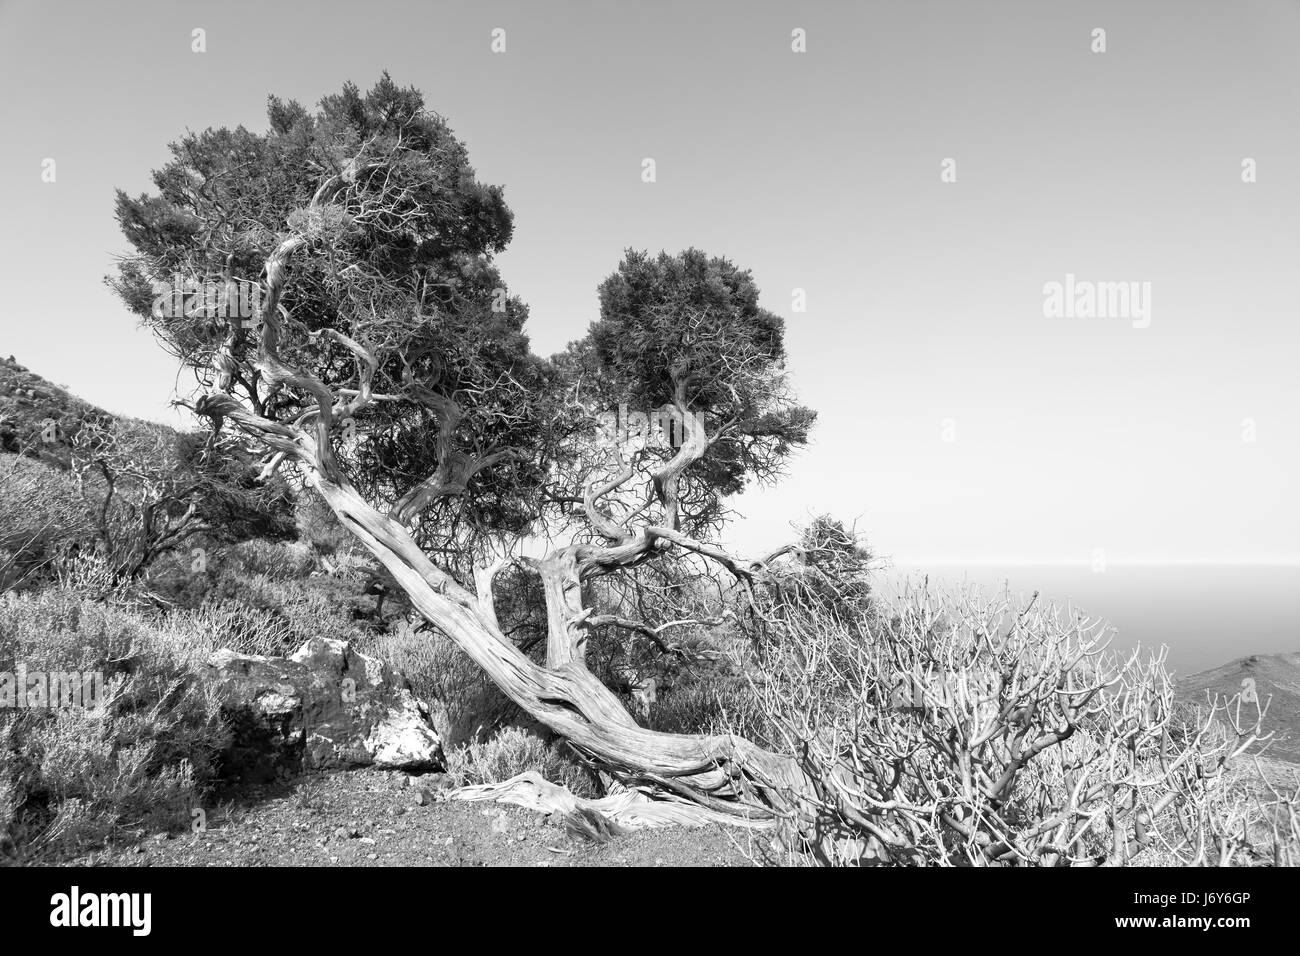 Bent by strong wind tree in highlands of El Hierro, Canary Islands. Black and white image Stock Photo